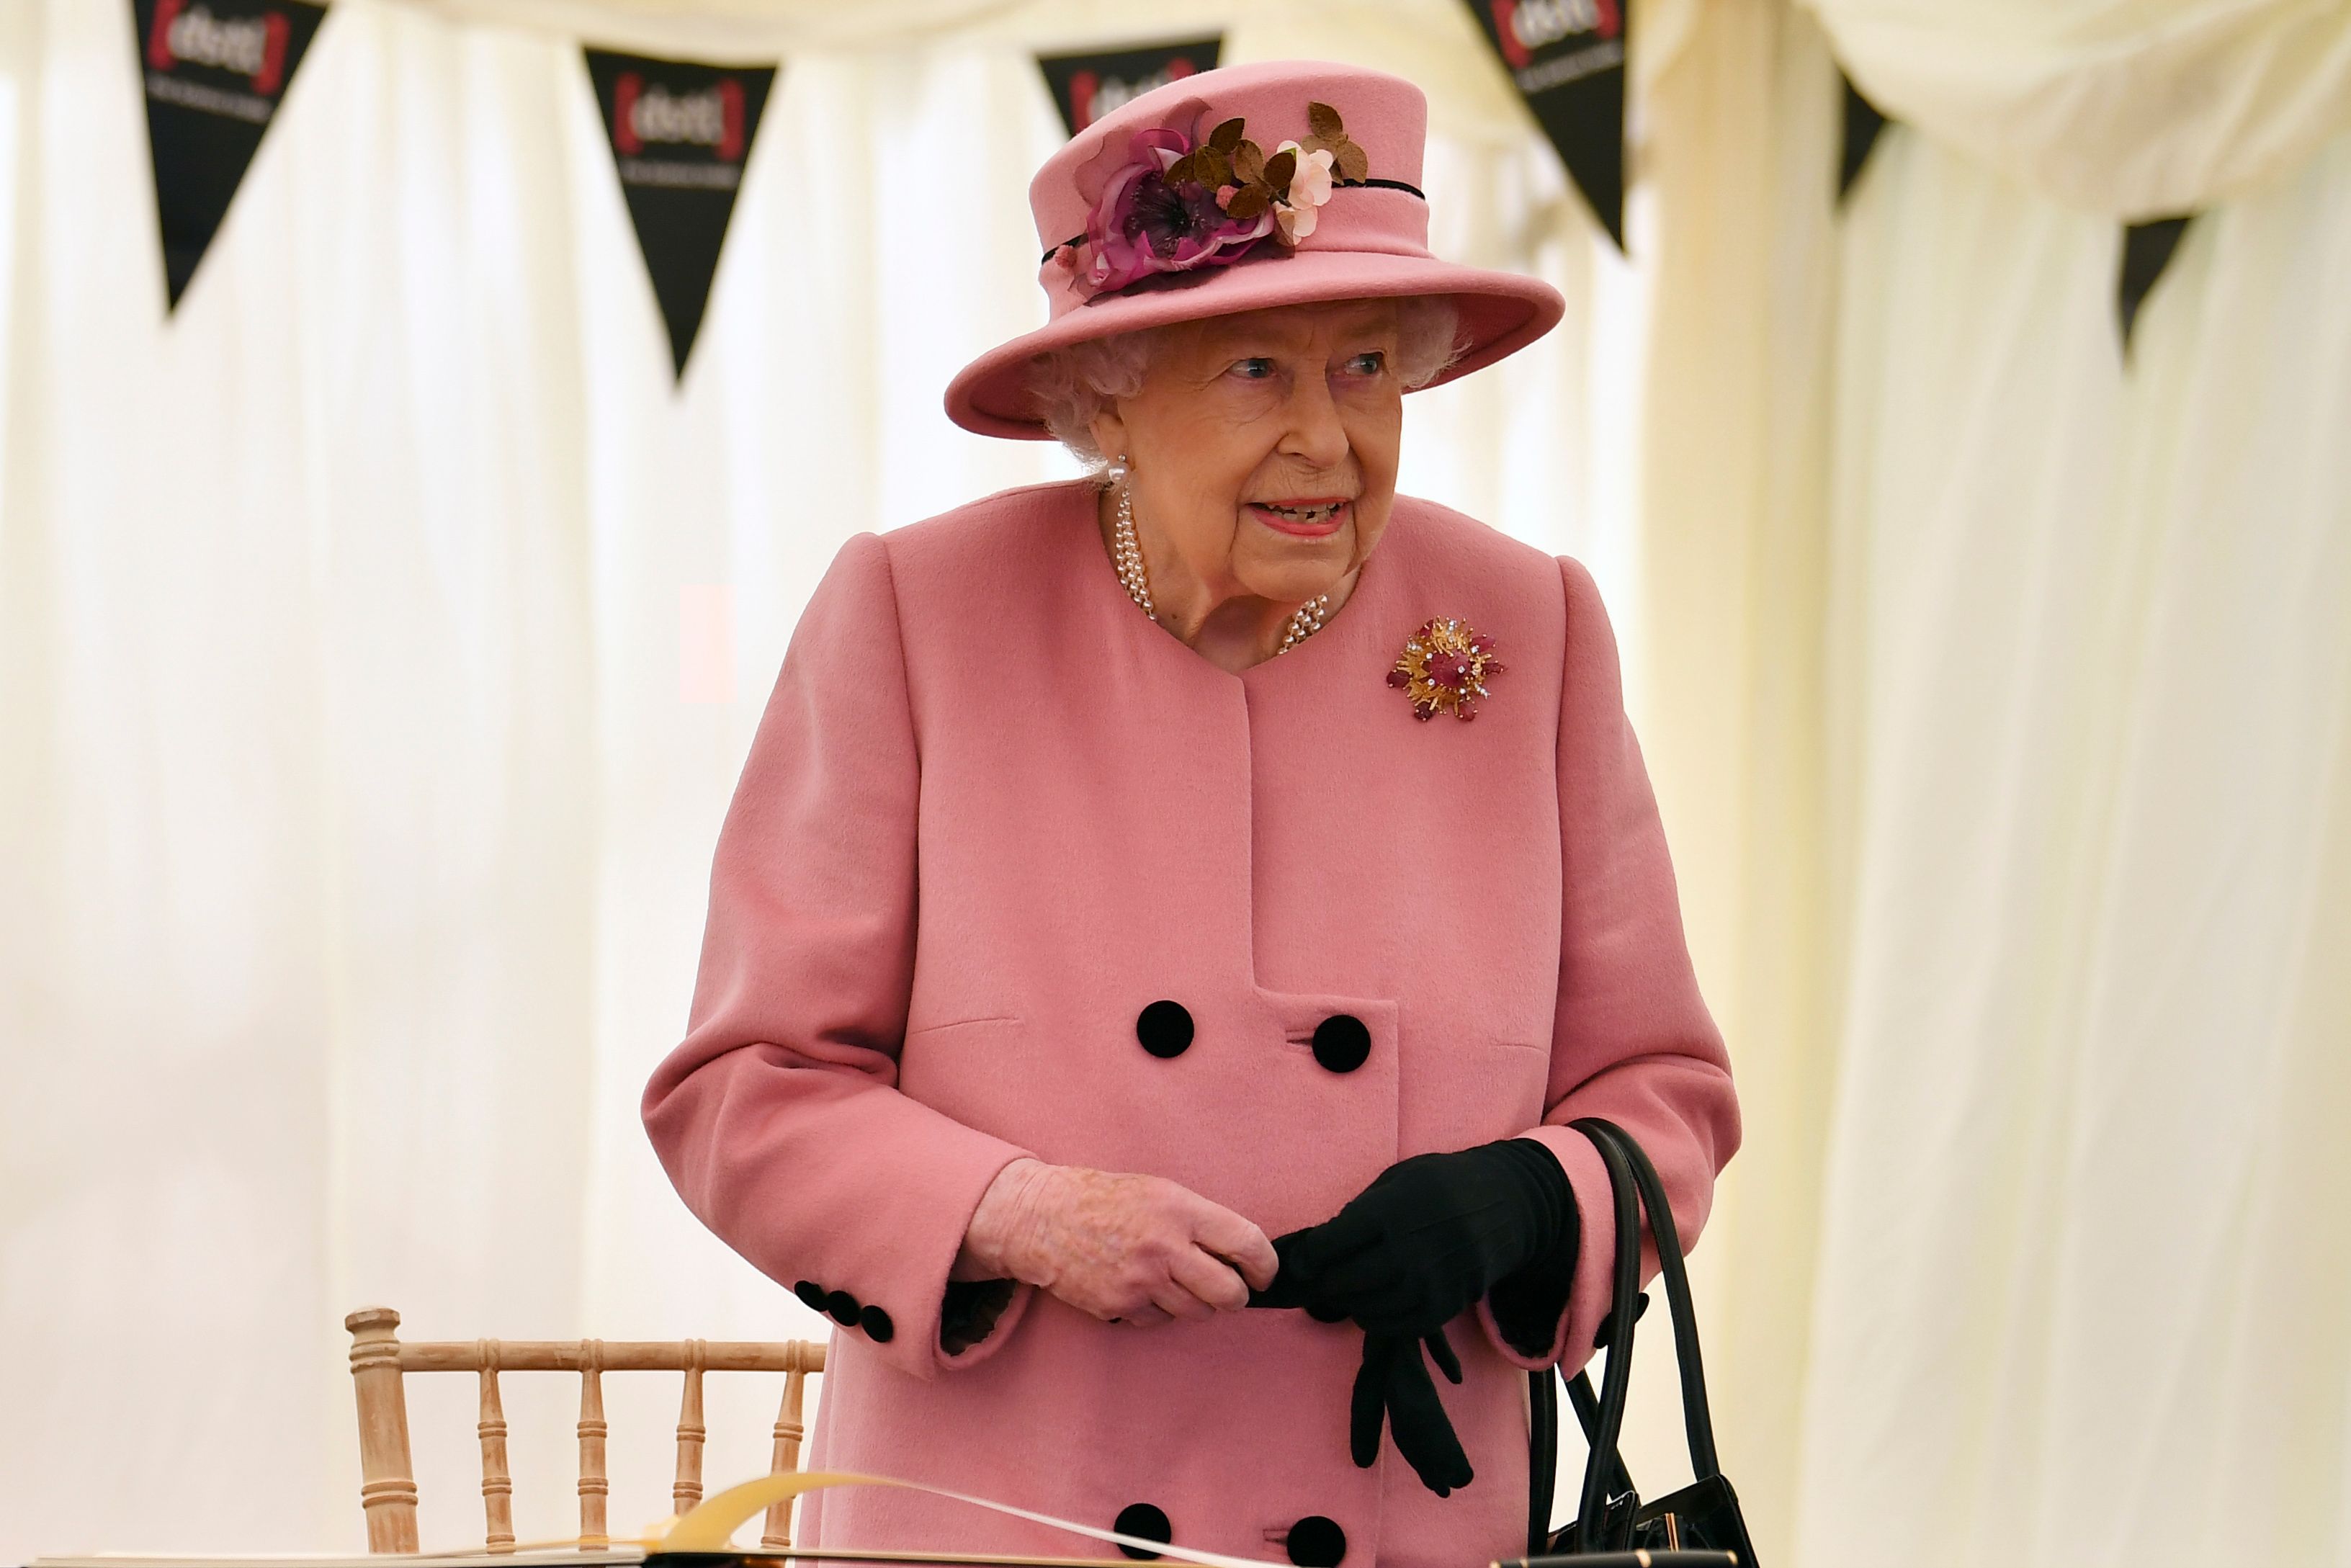 Queen Elizabeth II during her visit to the Defence Science and Technology Laboratory (Dstl) at Porton Down science park on October 15, 2020 | Photo: Getty Images